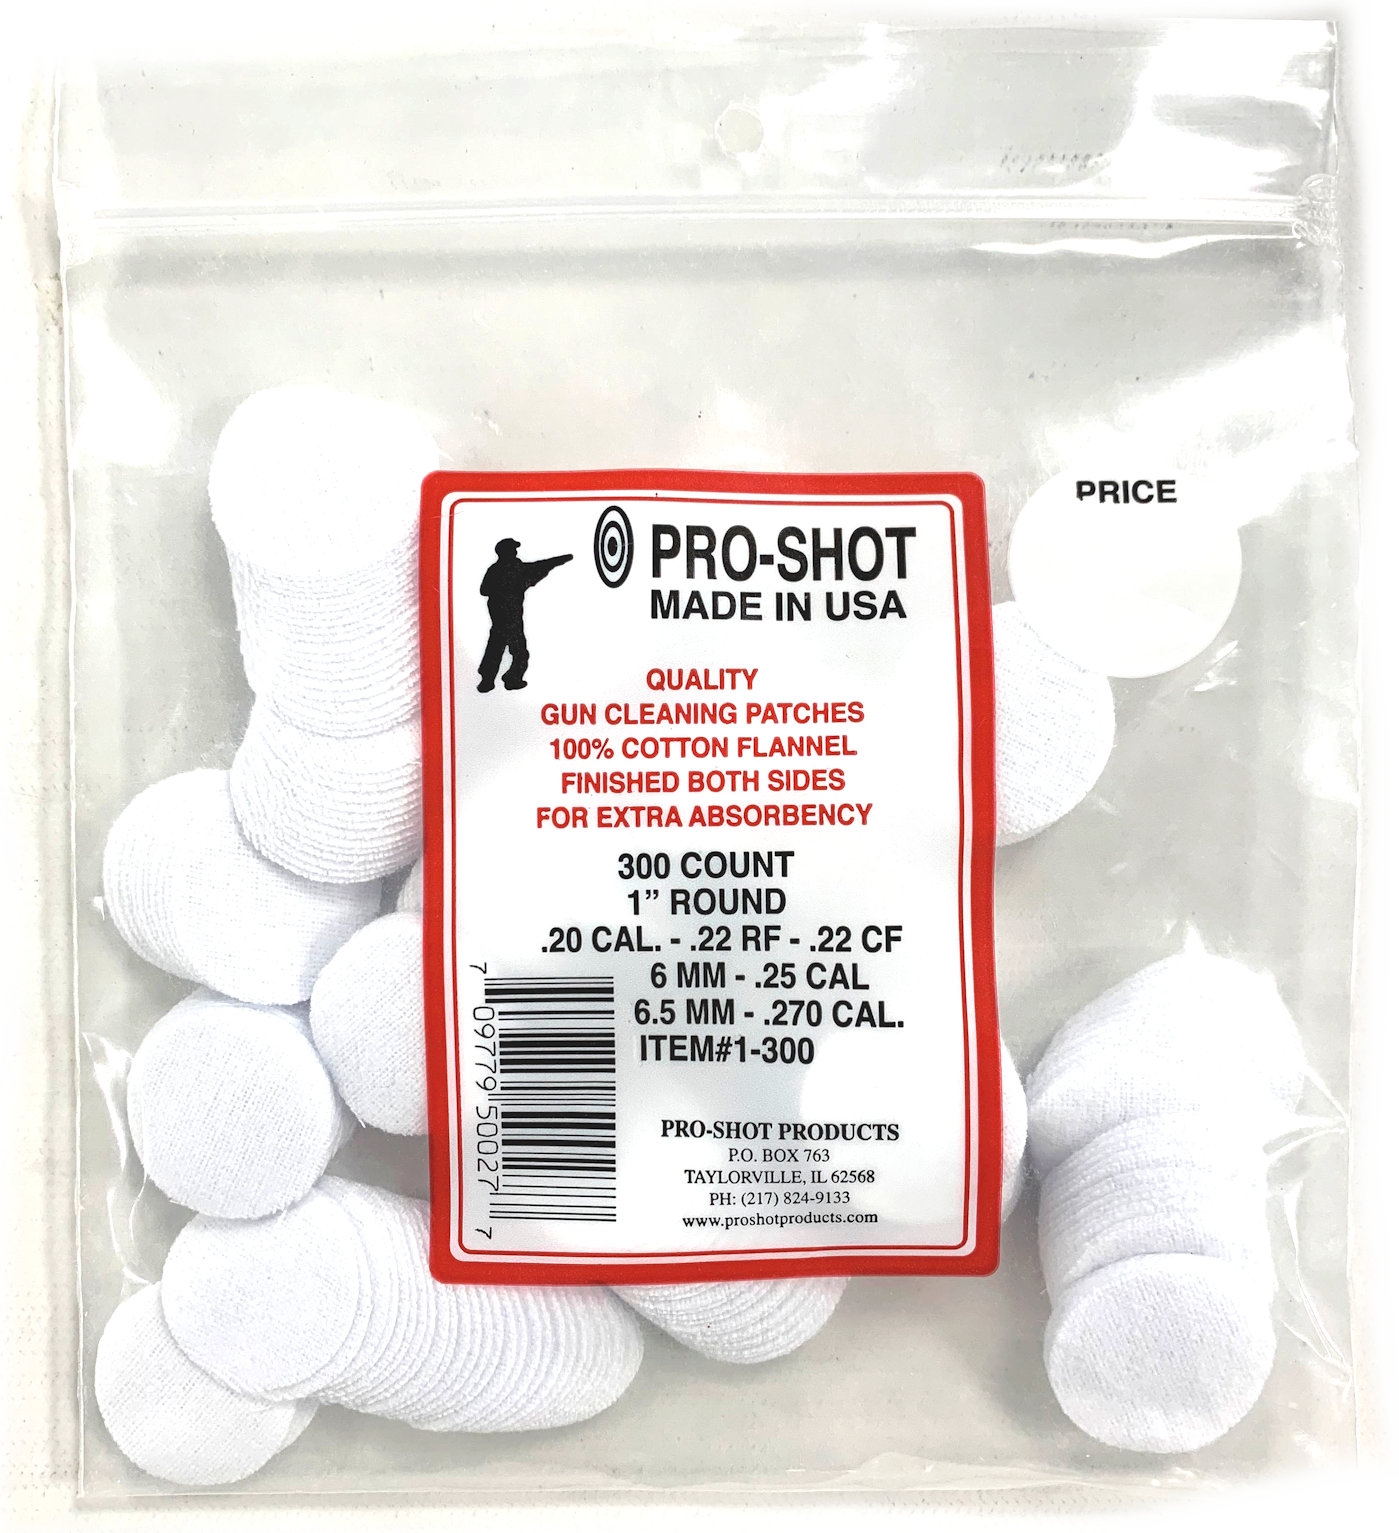 Pro-Shot 1" Round Rifle Cleaning Patches